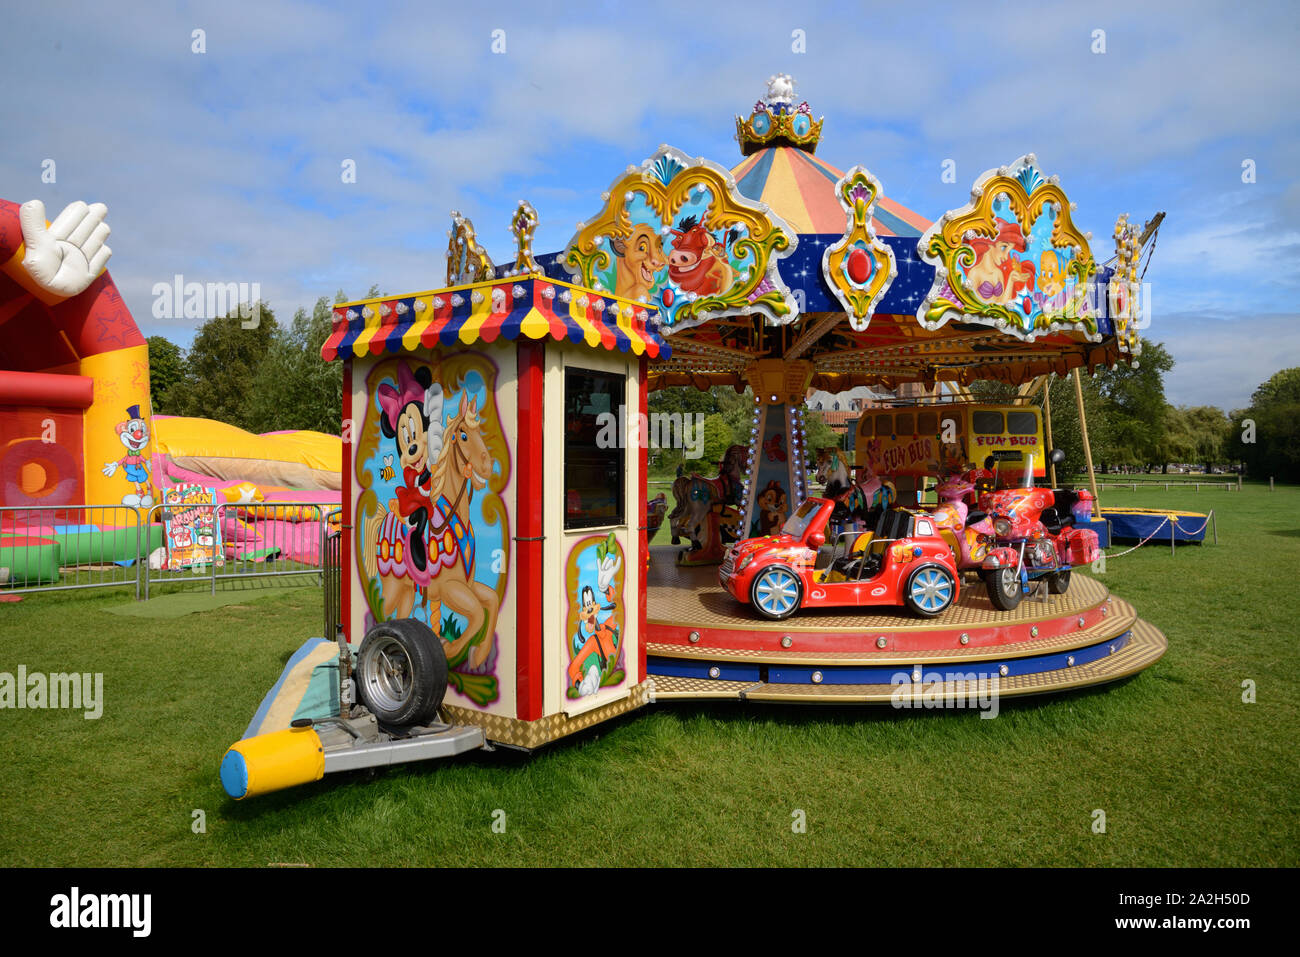 Kitsch or Decorative Carousel, Roundabout, Merry-Go-Round or Fun Fair with Toy Cars on the Recreation Ground or Playground Stratford-upon-Avon England Stock Photo